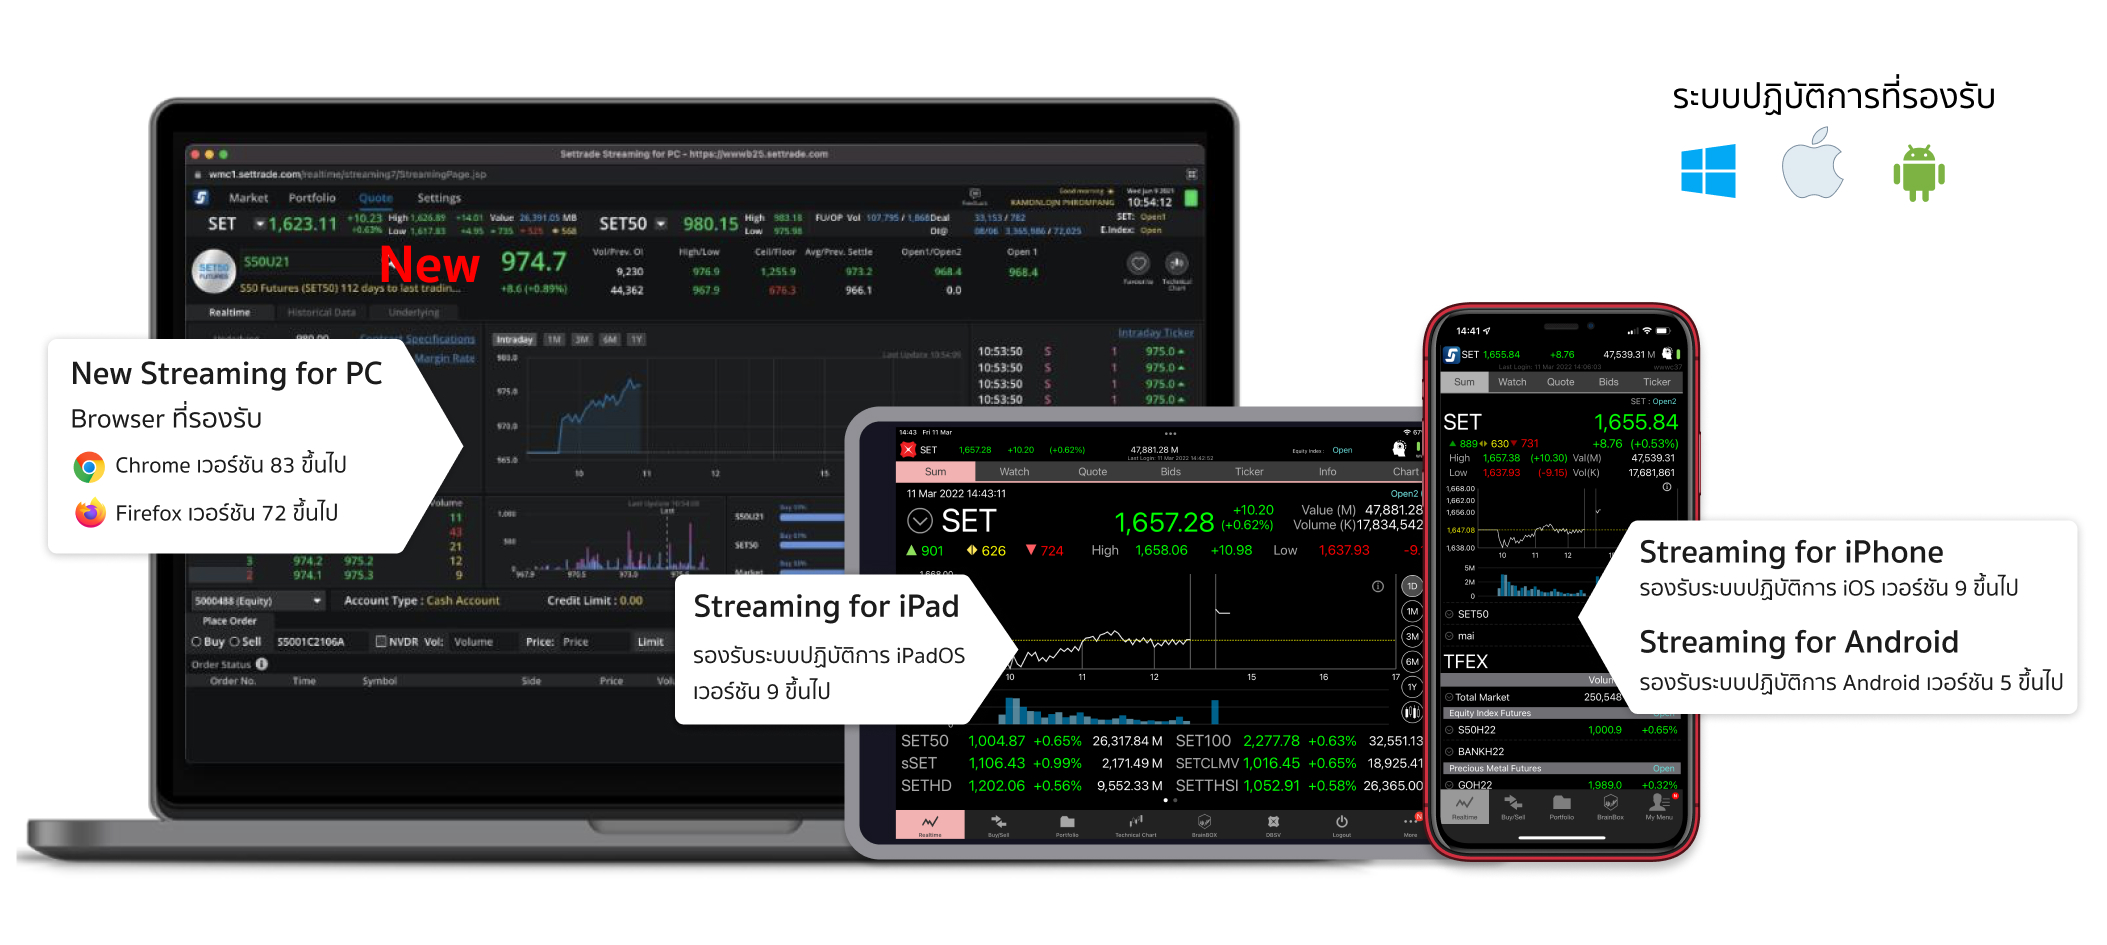 Settrade Streaming | Dbs Vickers Securities (Thailand)